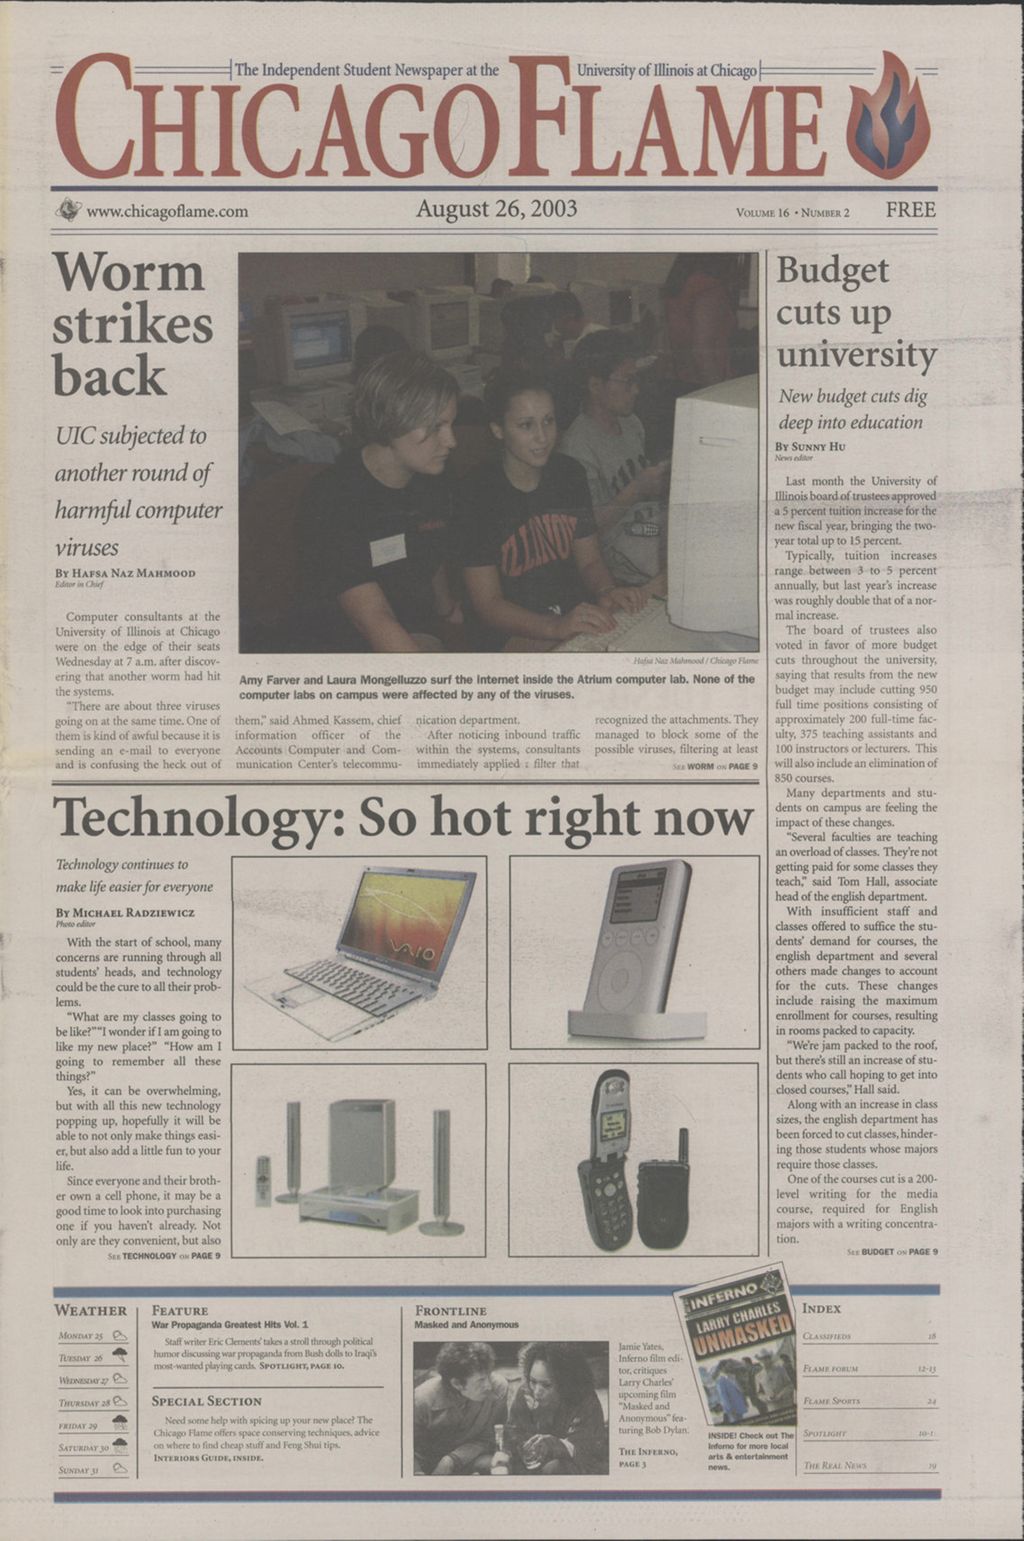 Chicago Flame (August 26, 2003)